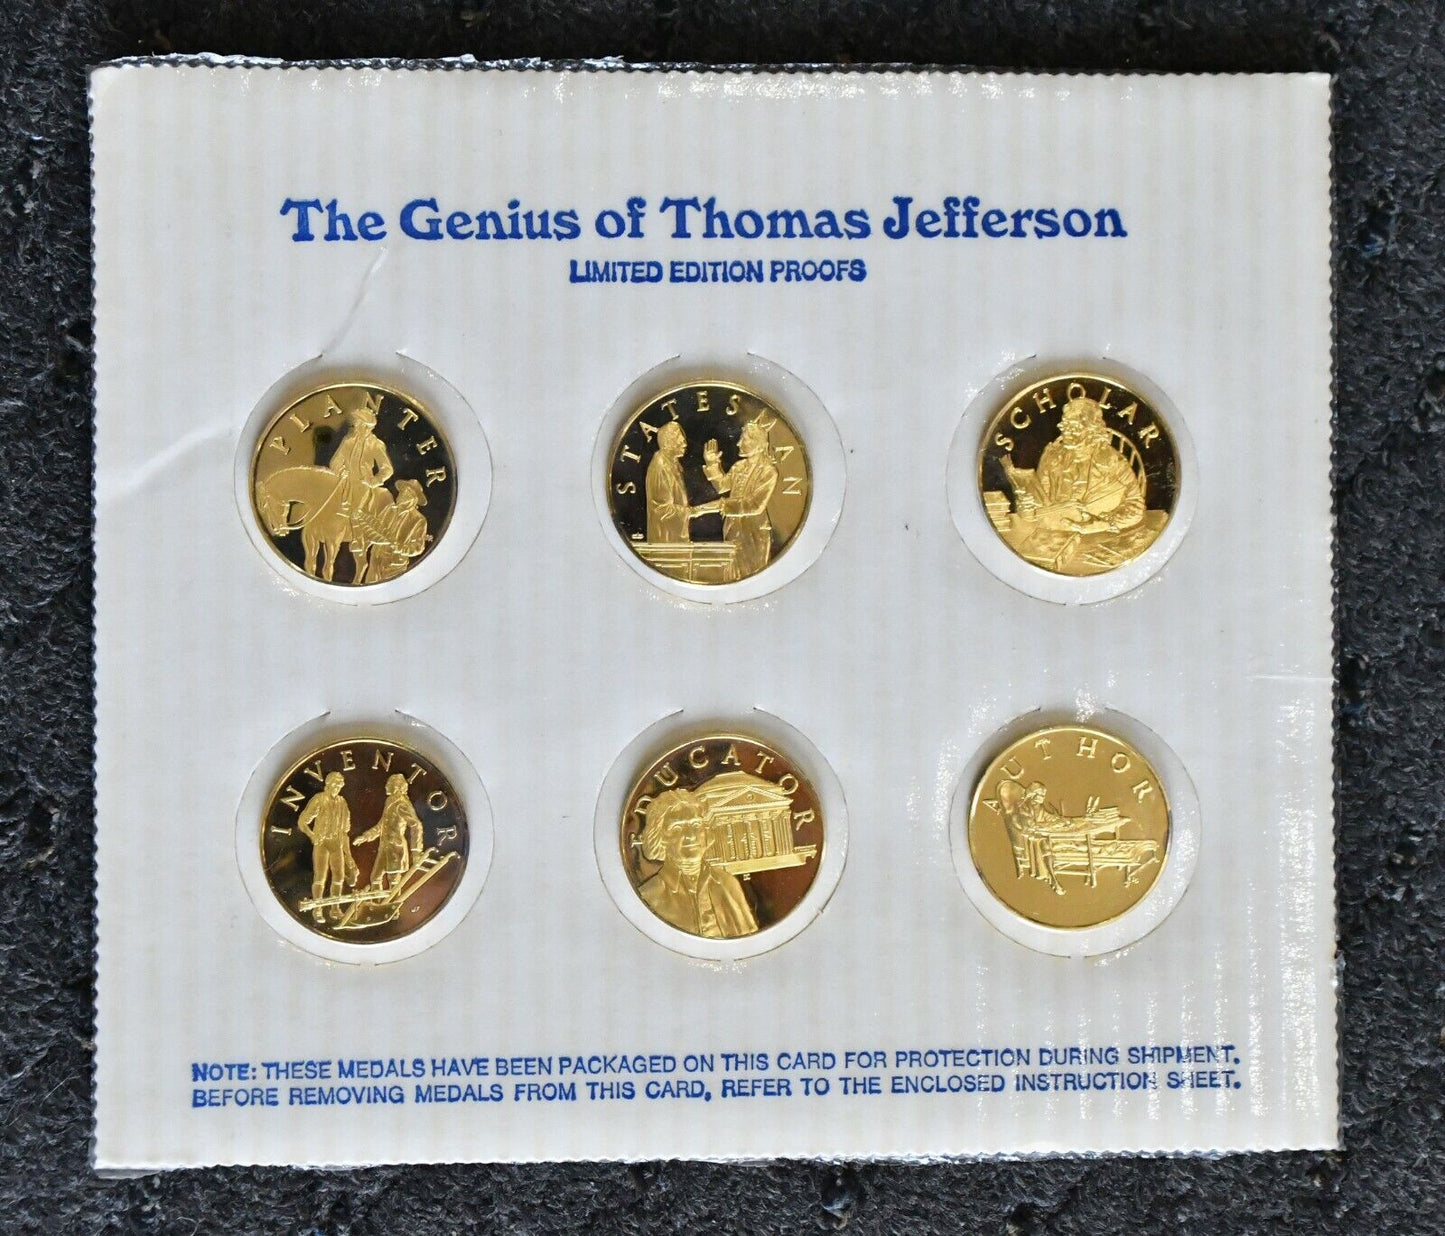 1976 The Genius of Thomas Jefferson Limited Edition Proof Franklin Mint 6pc Set